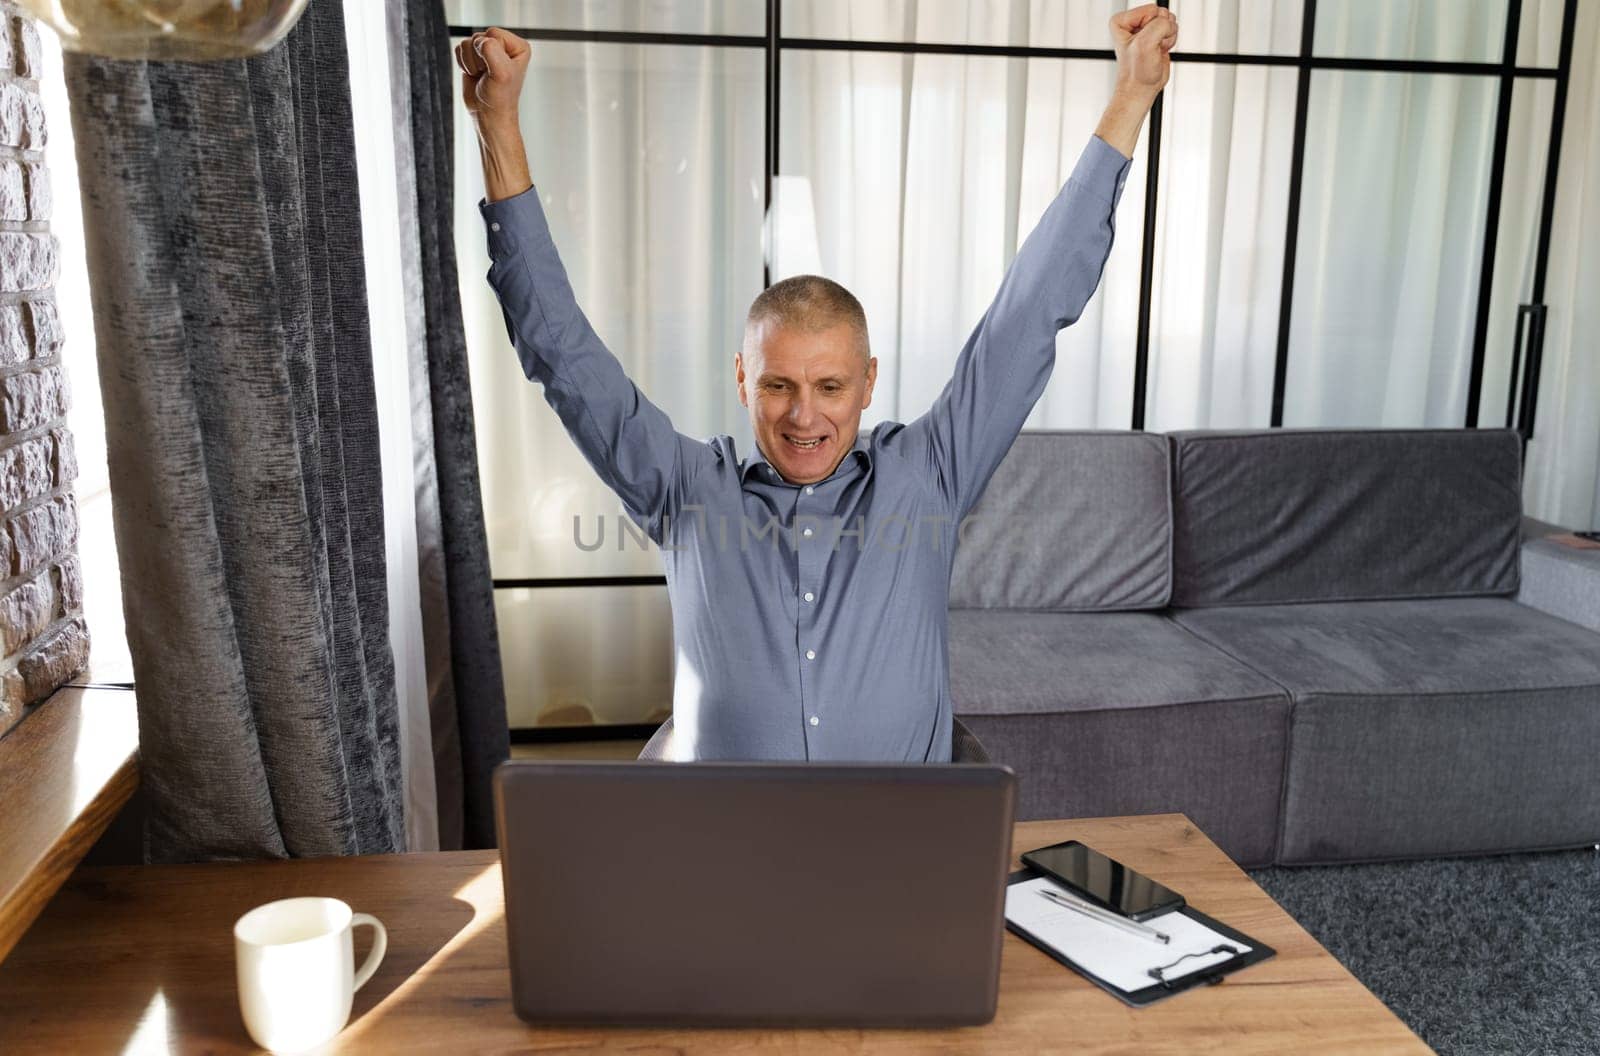 A businessman working at a computer rejoices in a perfect successful transaction, raising his hands up. The concept of success.